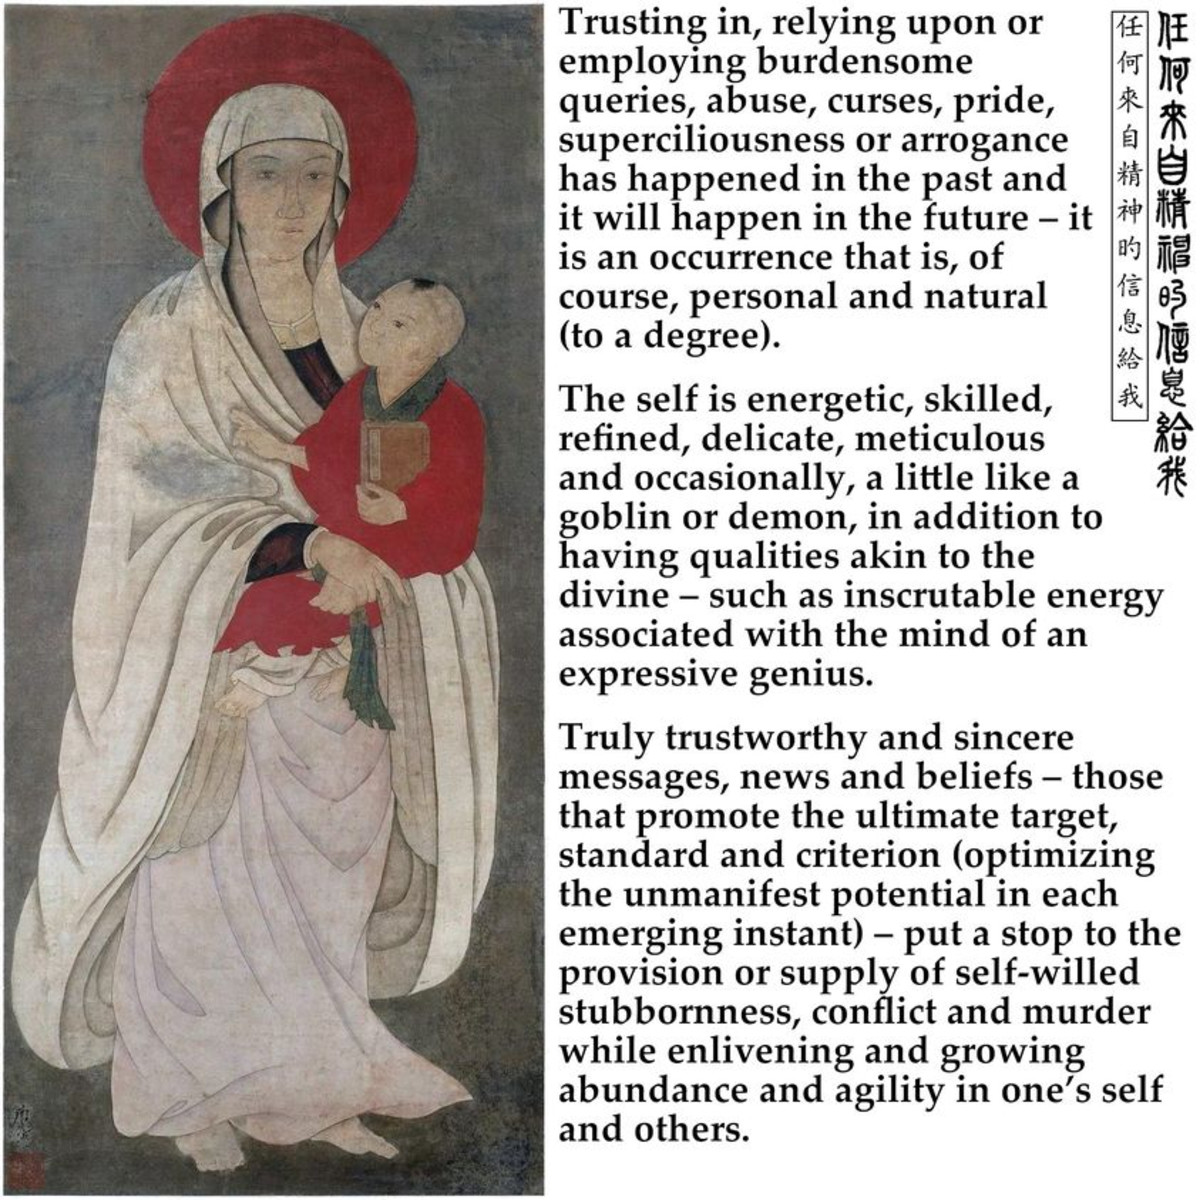 On the left is an image showing a Chinese painting that may date to the late-15th or early-16th Century - it is known as "The Madonna Scroll" (Brockey 2007). To the right is the 'oraculum' noted in the article with ancient and modern Chinese text